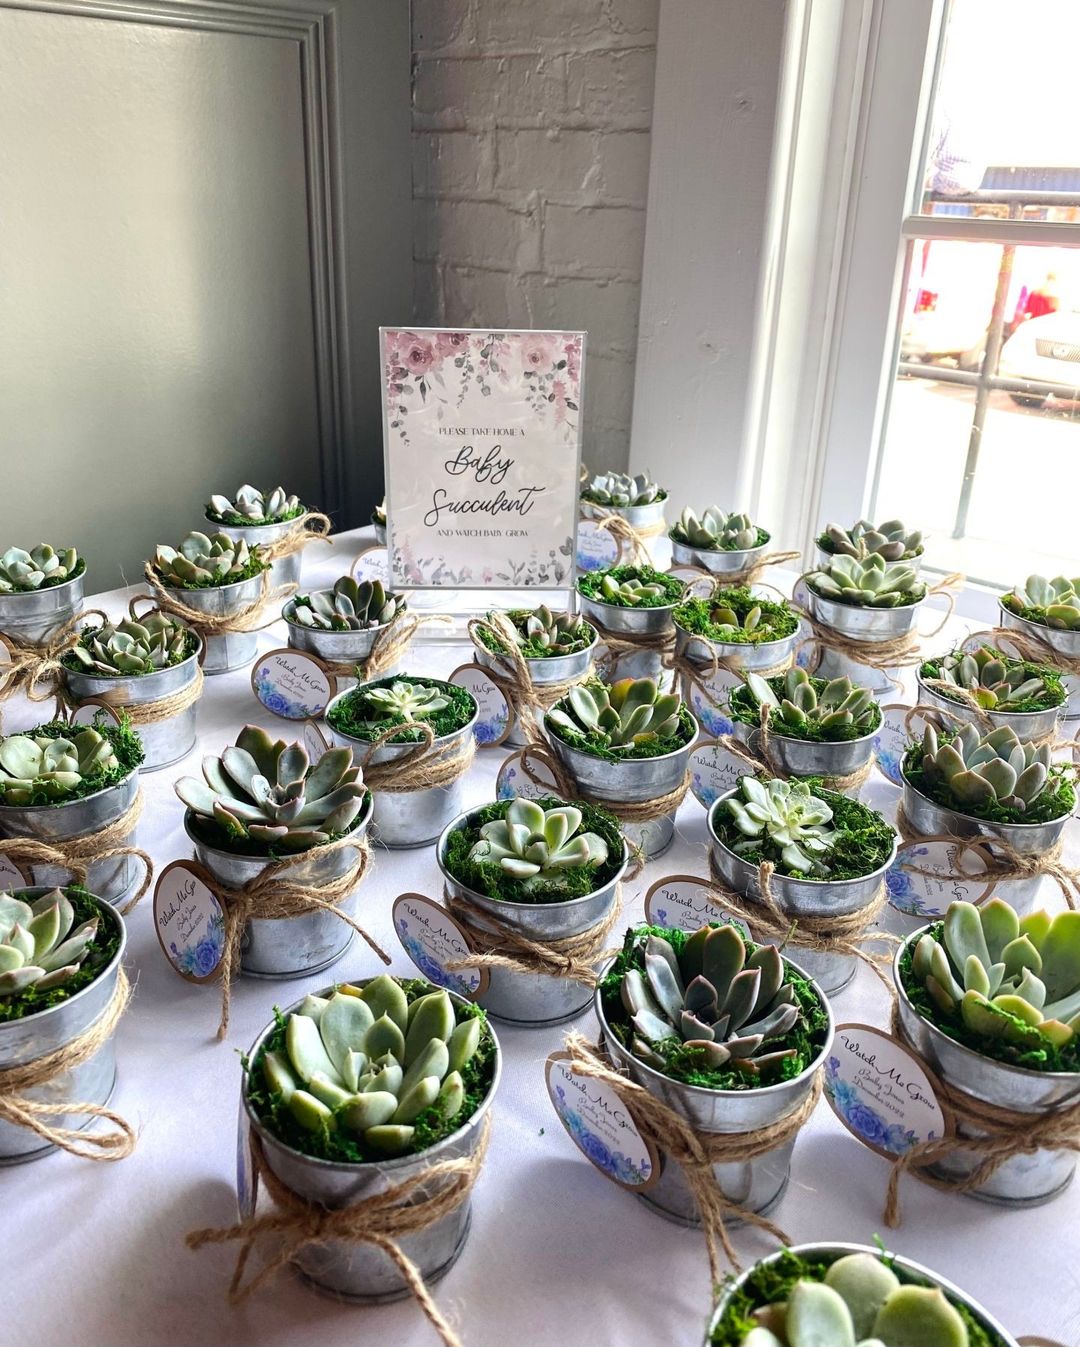 Baby succulents are used as a baby shower favor. Photo by Instagram User @durhamexchange.